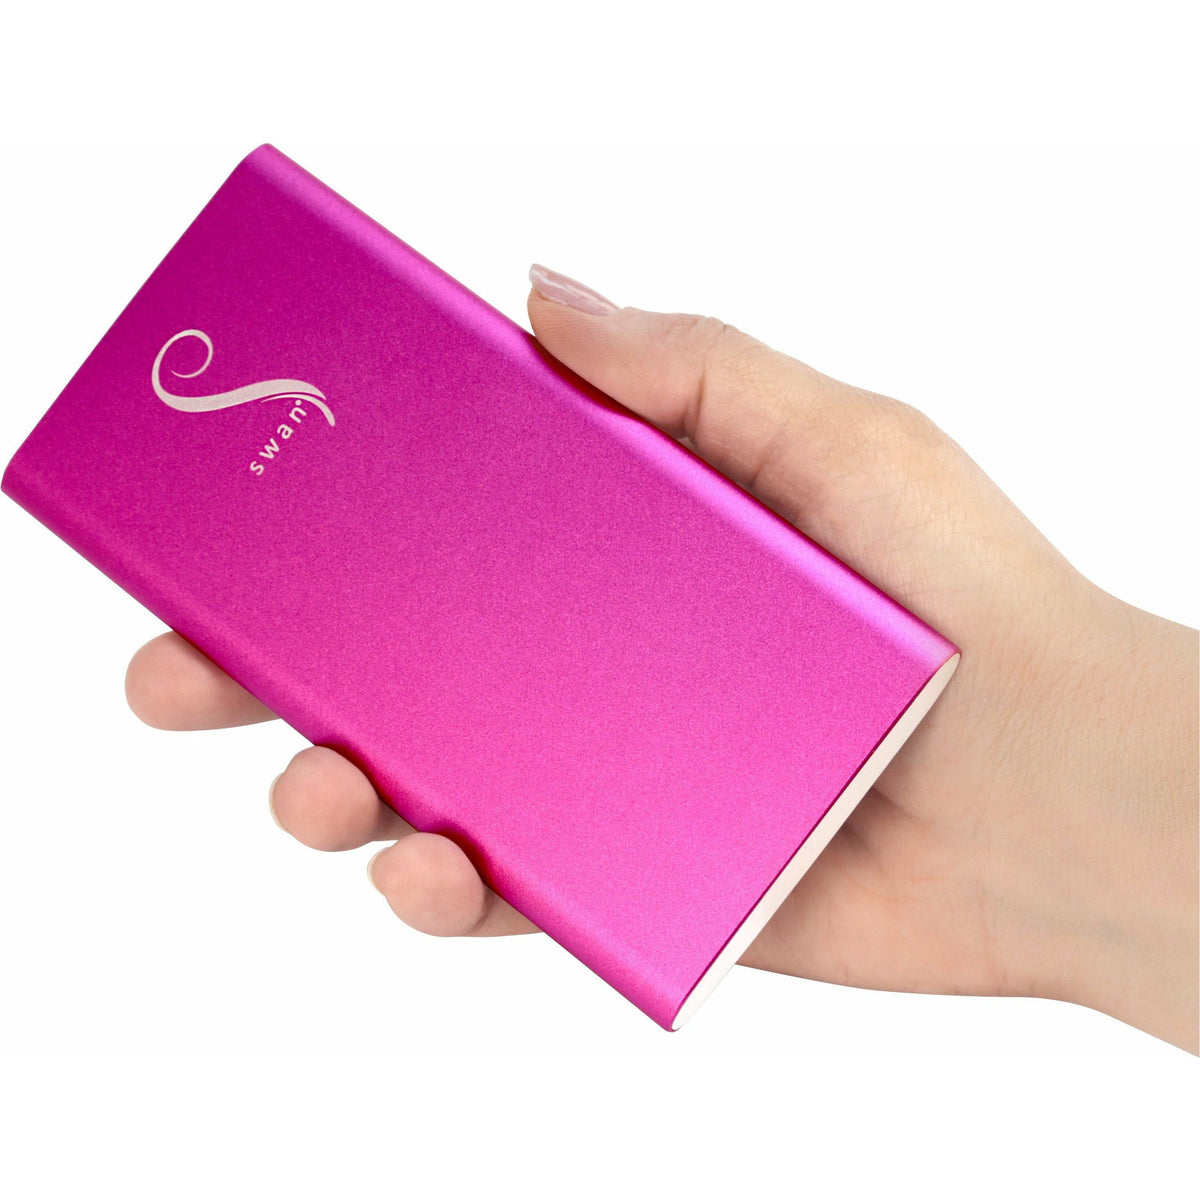 Swan® 5000 mAh Power Bank for USB Products